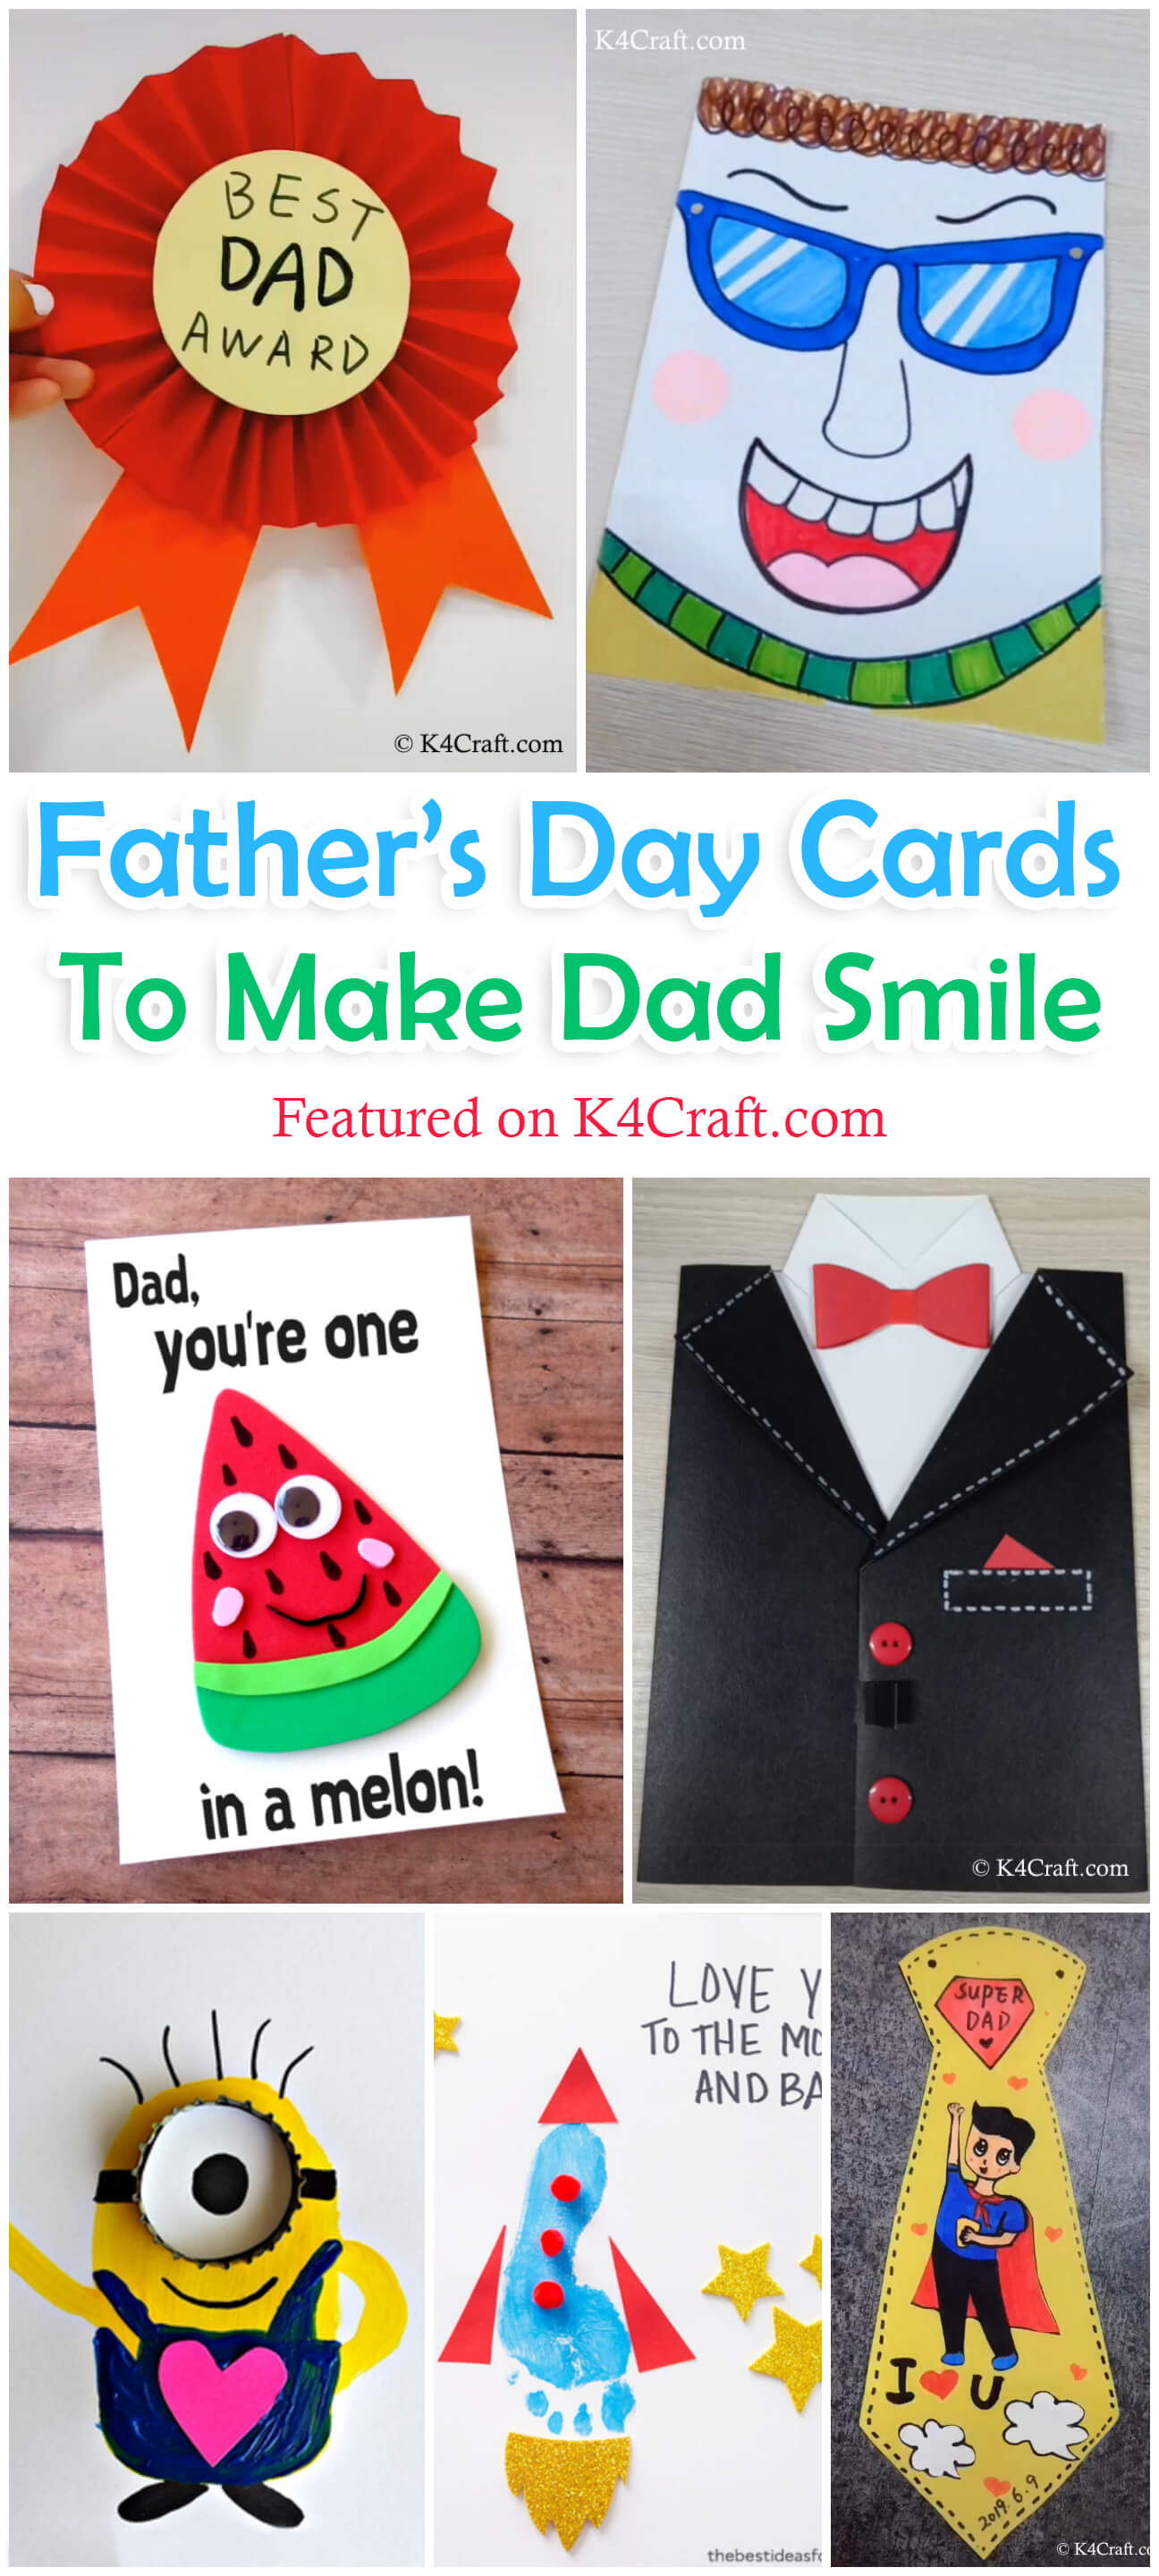 Birthday Card Craft Ideas For Dad ~ Diy-fathers-day-cards-to-make-dad ...